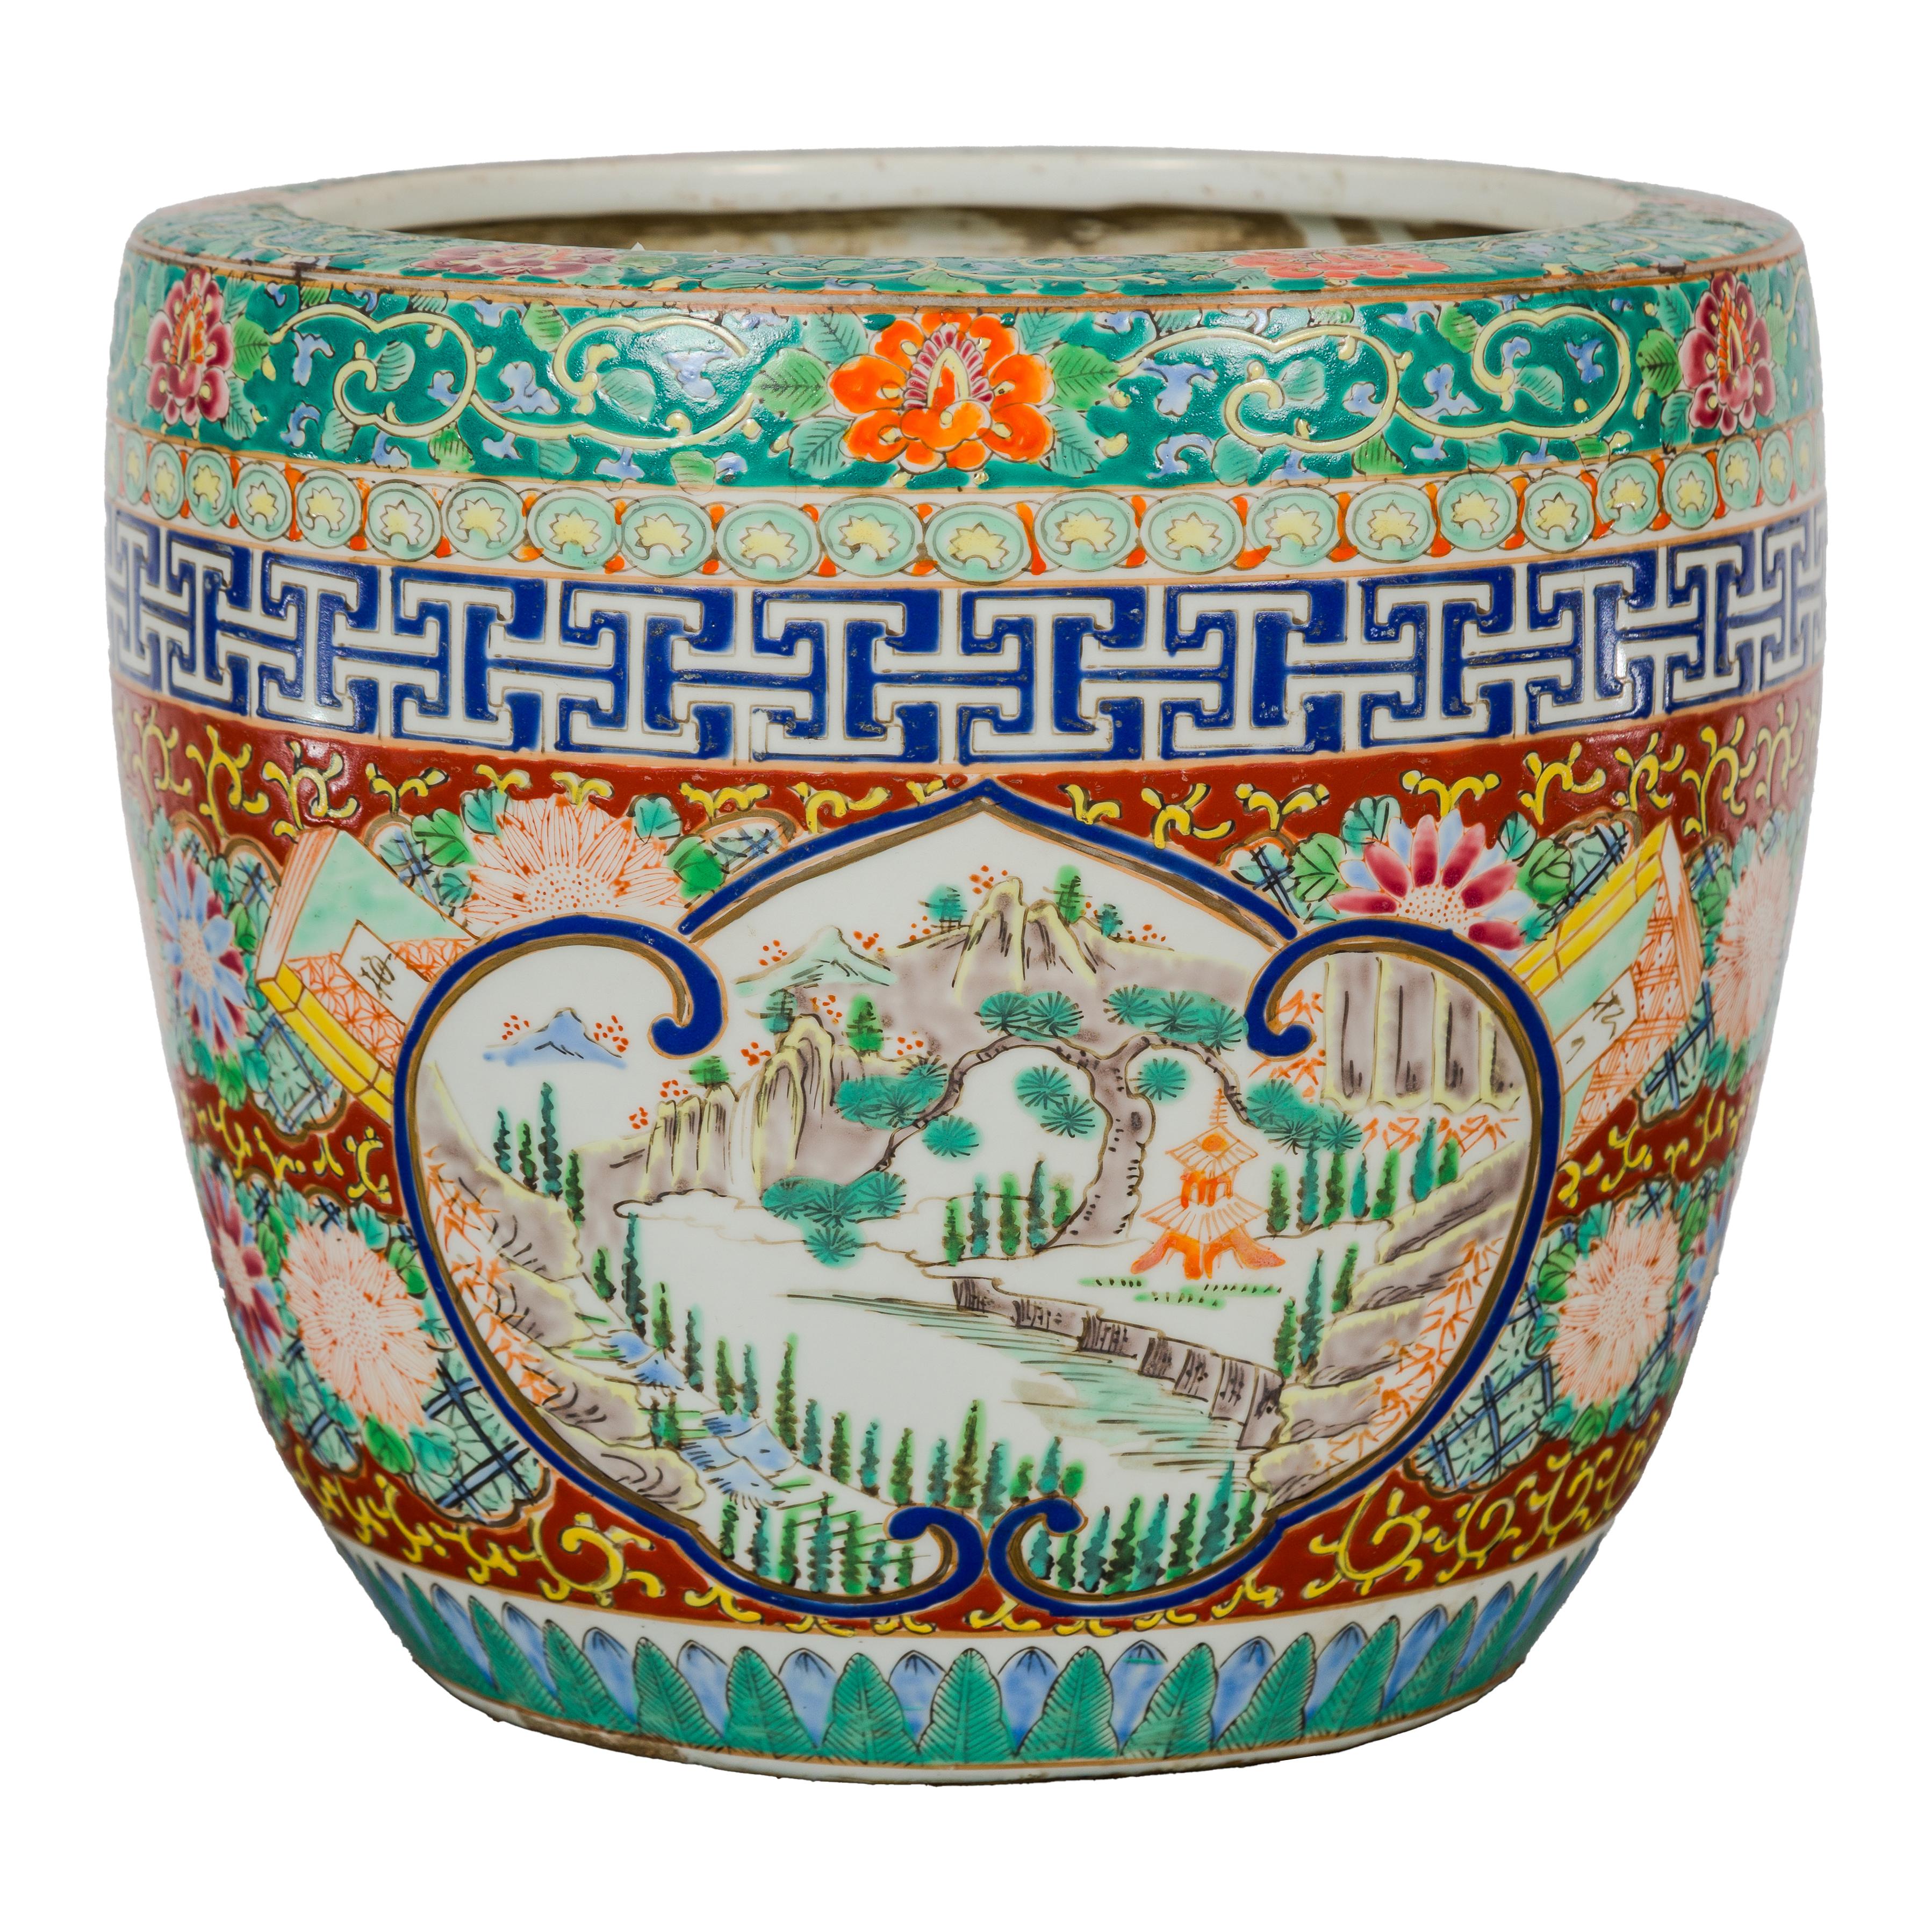 A hand-painted Japanese Imari porcelain planter from the early 20th century, with green, red and blue tones. This early 20th-century Japanese Imari porcelain planter is a celebration of traditional craftsmanship and aesthetic. Hand-painted with